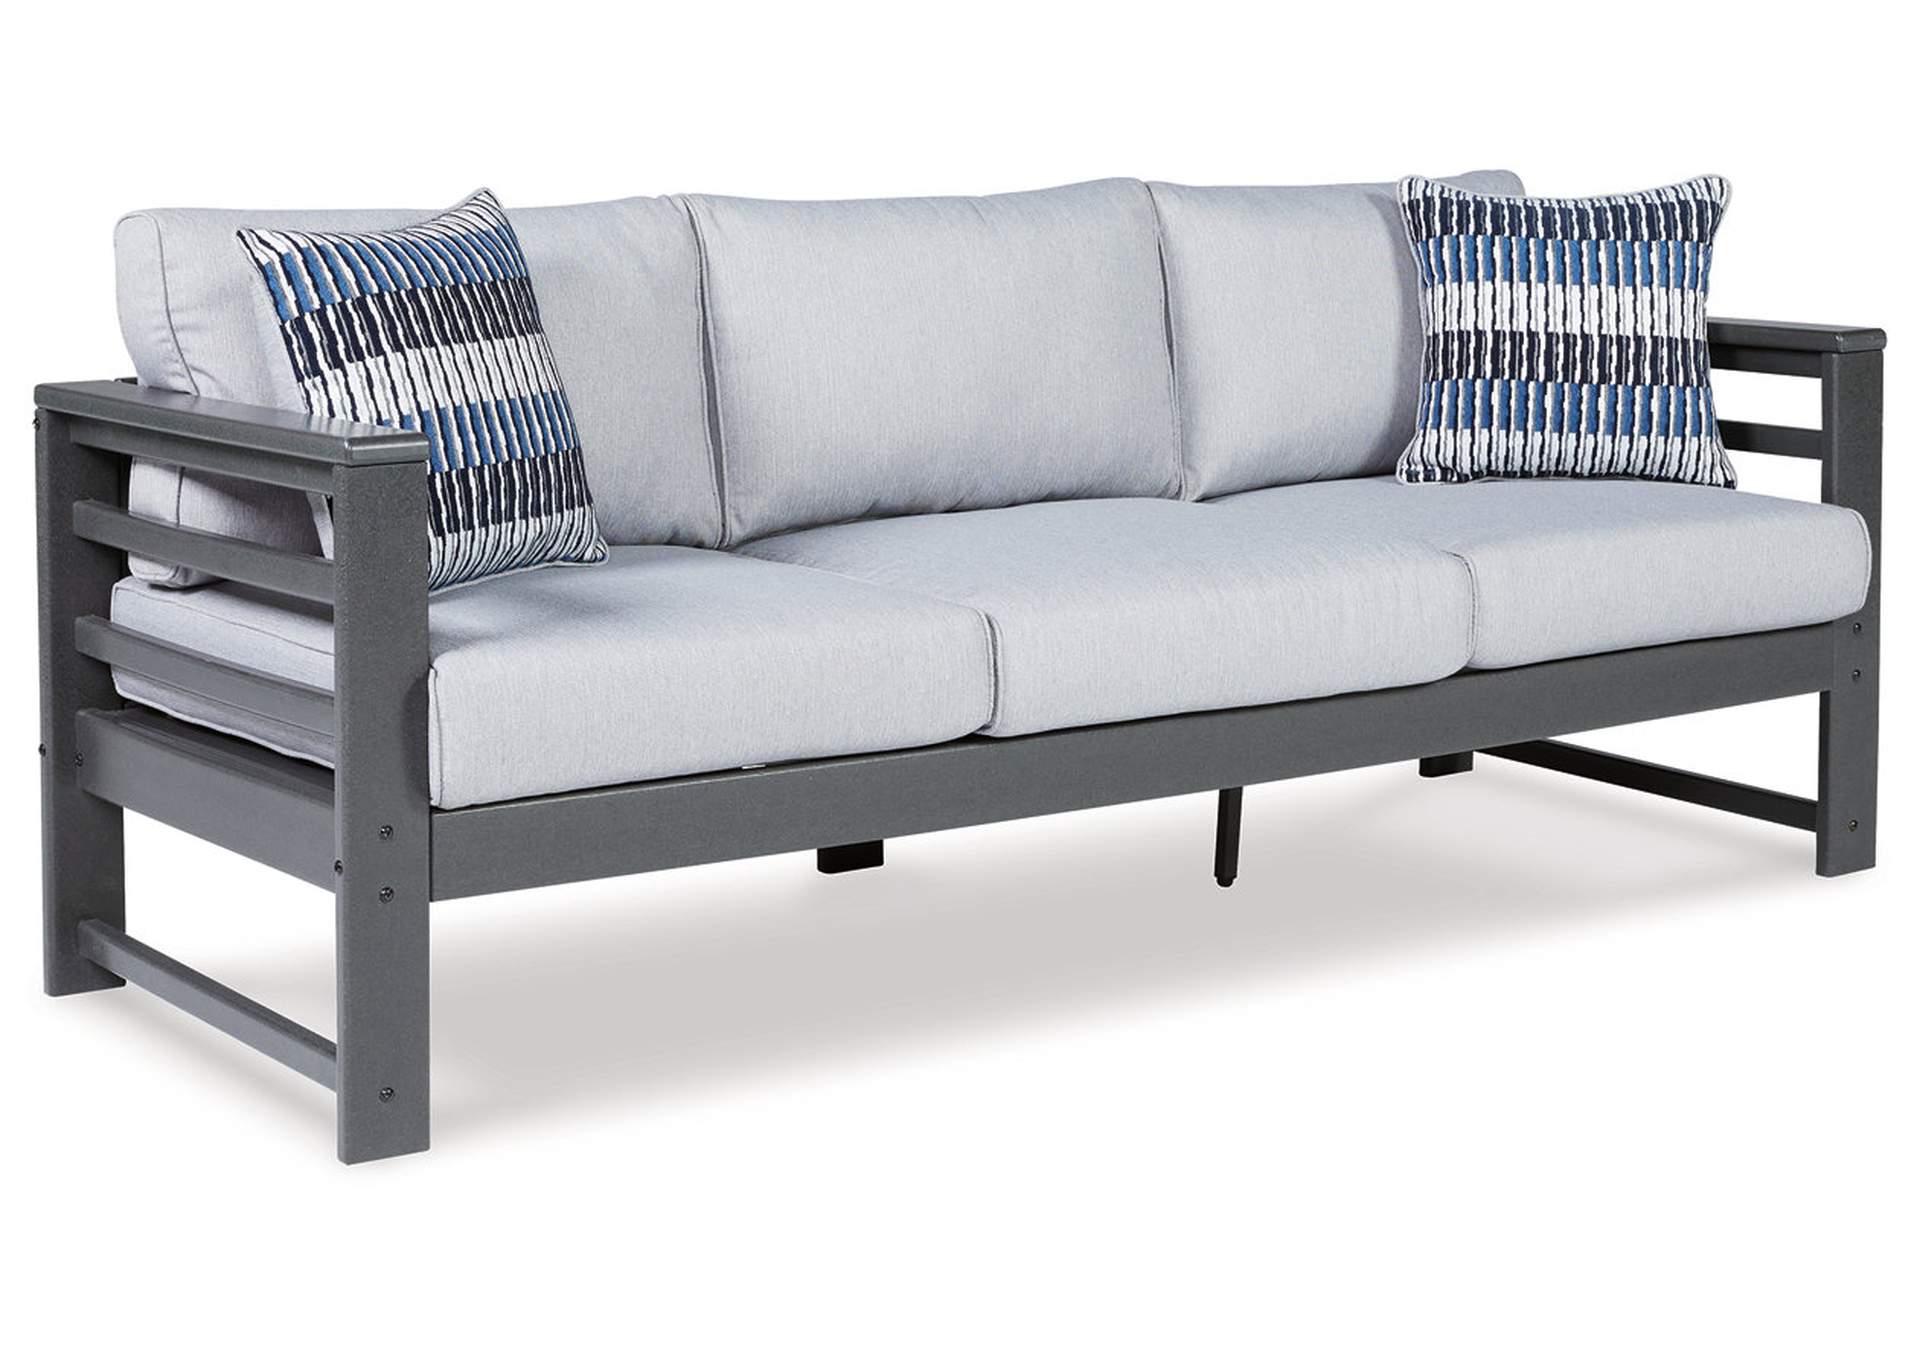 Amora Outdoor Sofa with Coffee Table,Outdoor By Ashley